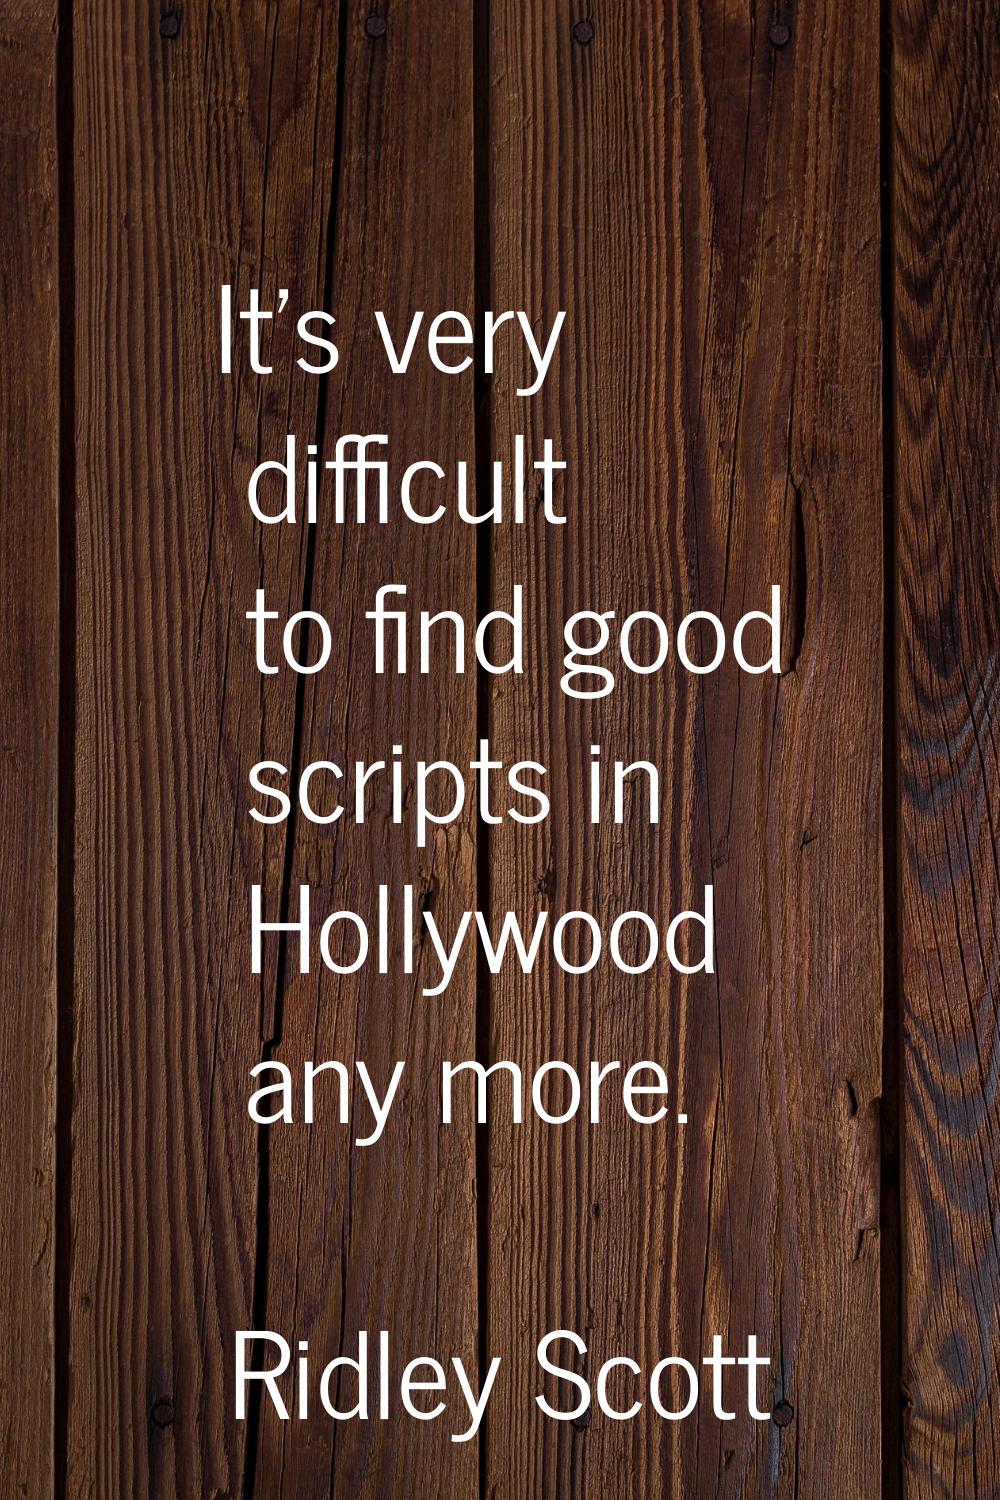 It's very difficult to find good scripts in Hollywood any more.